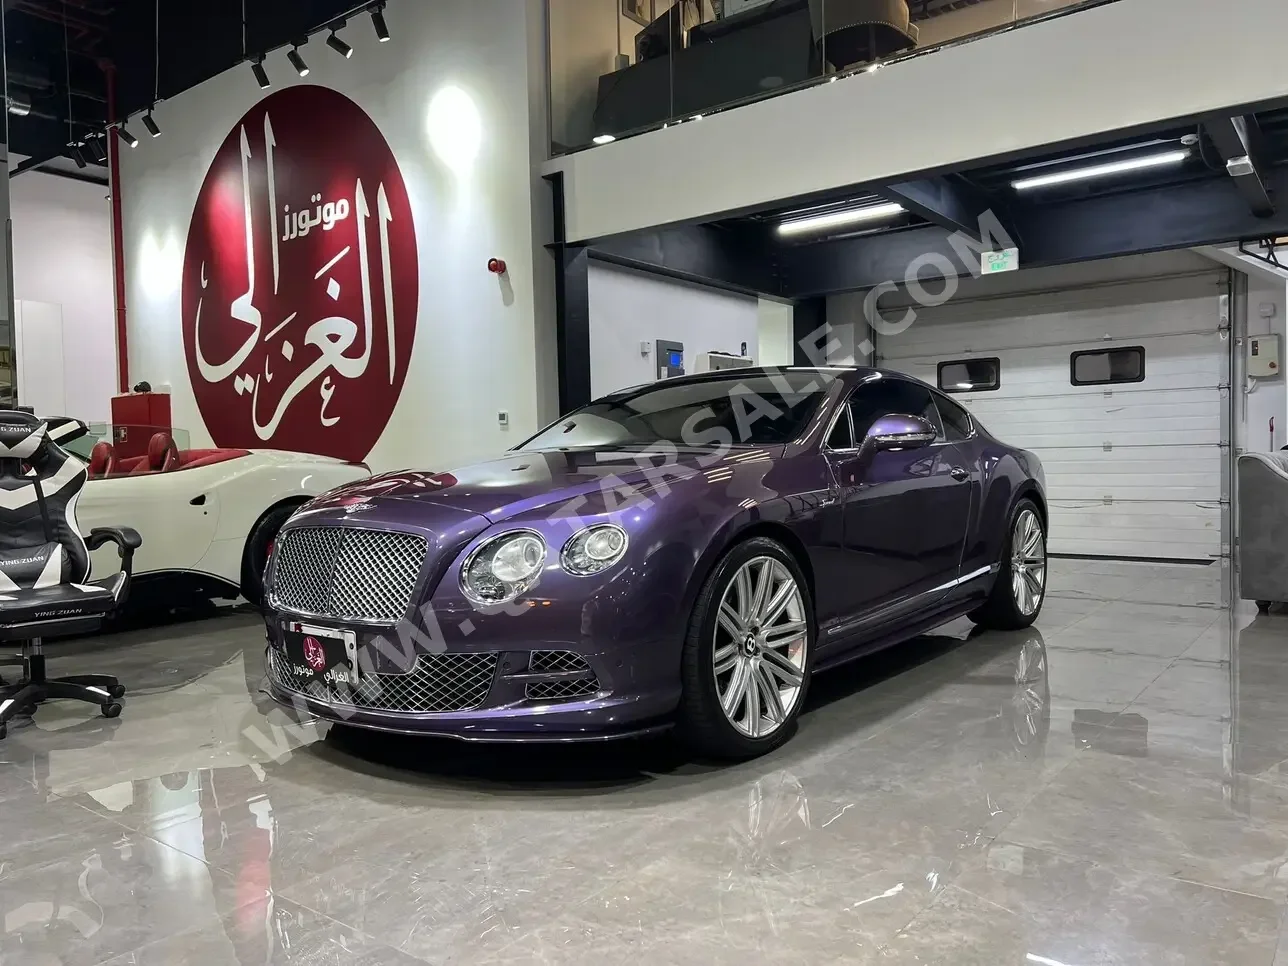  Bentley  GT  Speed  2015  Automatic  60,000 Km  12 Cylinder  All Wheel Drive (AWD)  Coupe / Sport  Violet  With Warranty